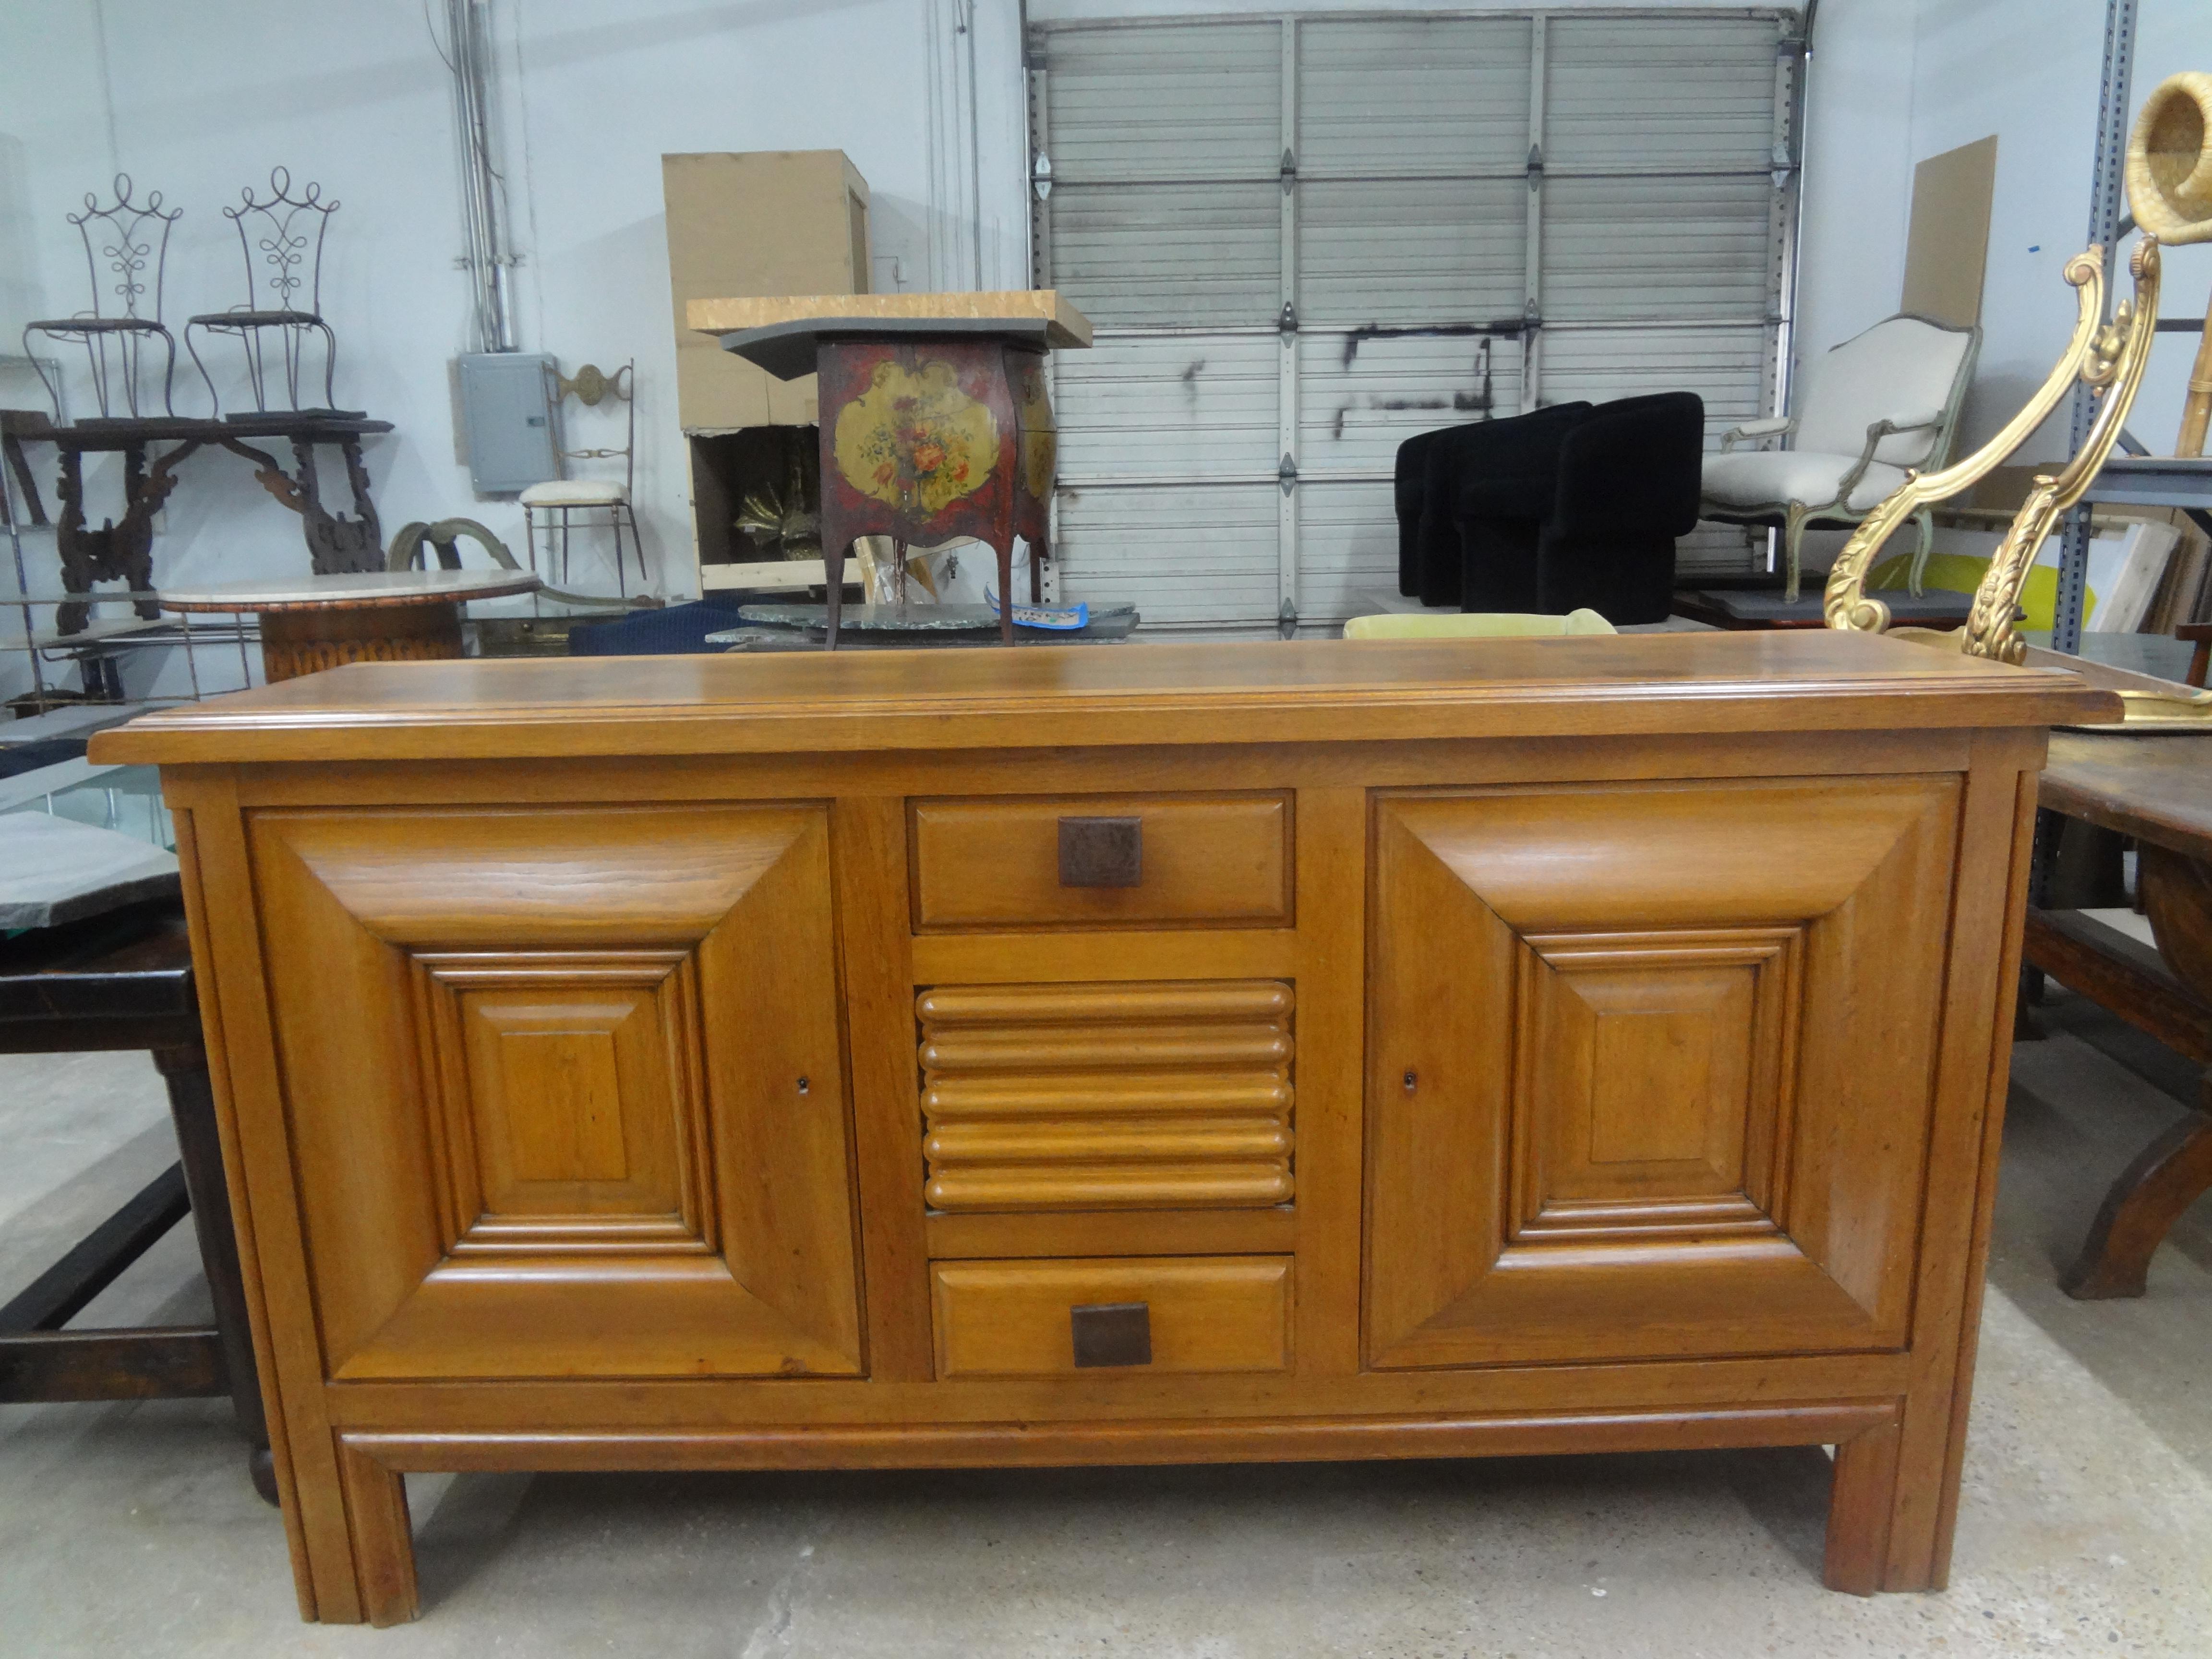 French Brutalist Sideboard Signed Charles Dudouyt.
This French Modern credenza, sideboard or enfilade has two cabinet doors, two drawers with two original keys and beautiful bronze hardware.  The piece is signed by the maker, Charles Dudouyt as